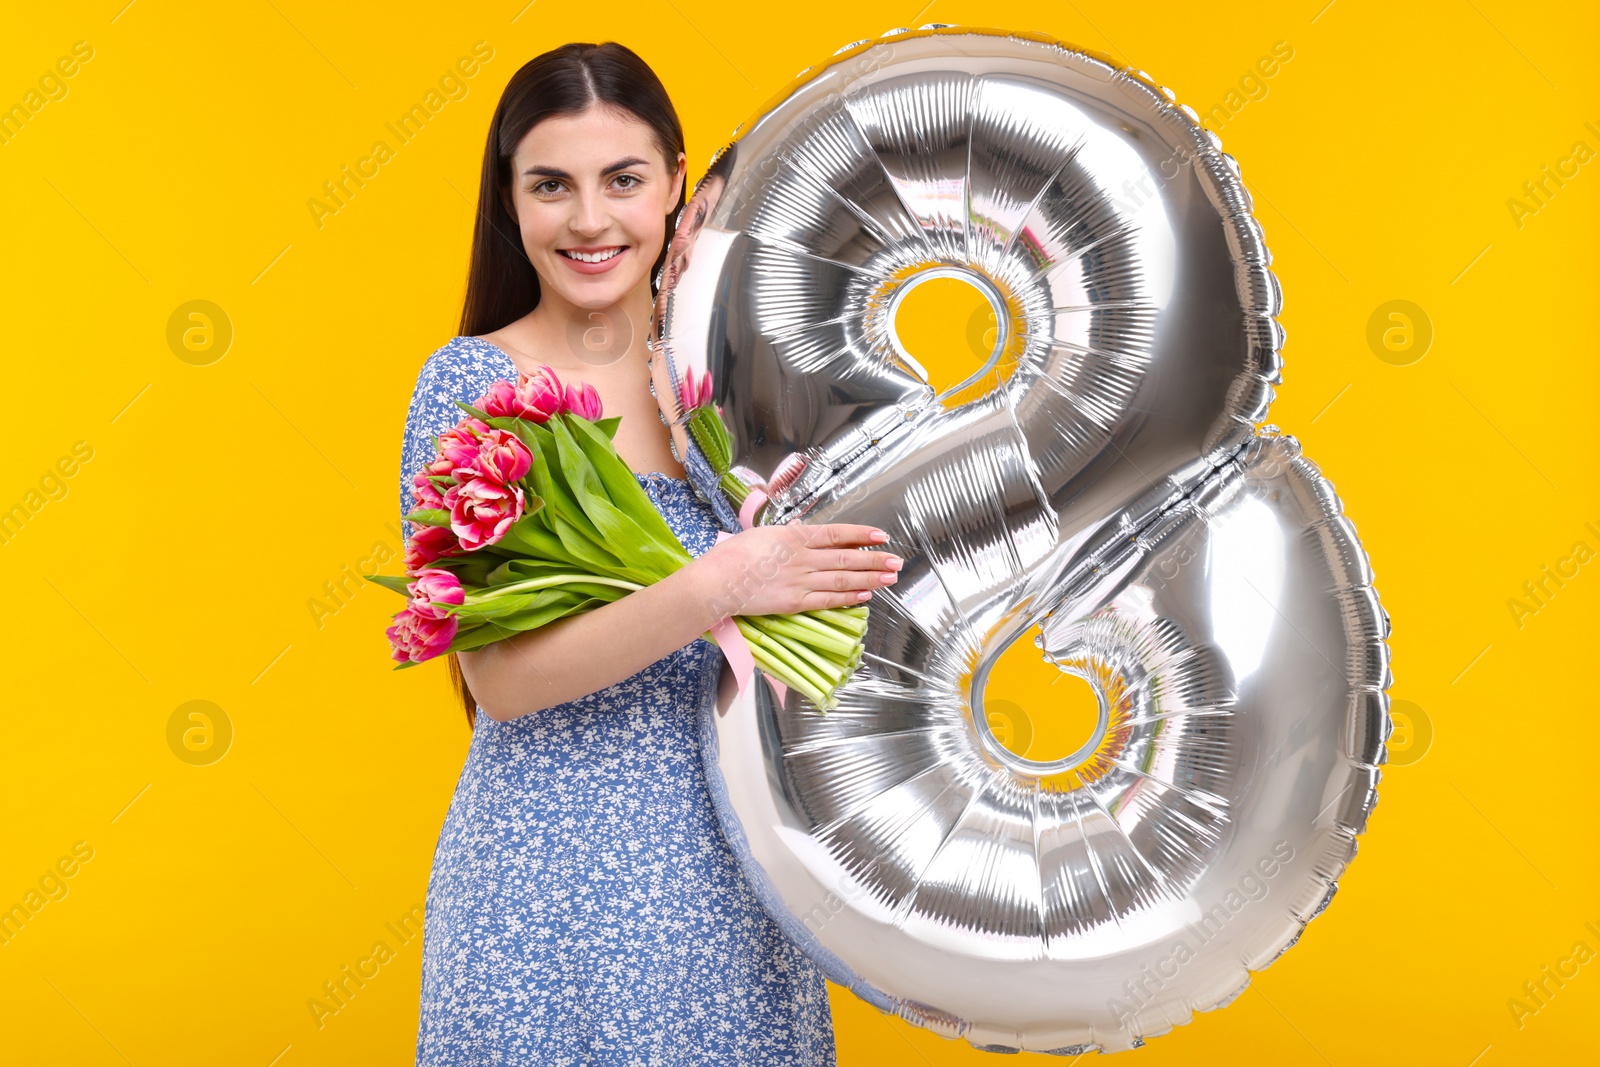 Photo of Happy Women's Day. Charming lady holding bouquet of beautiful flowers and balloon in shape of number 8 on orange background